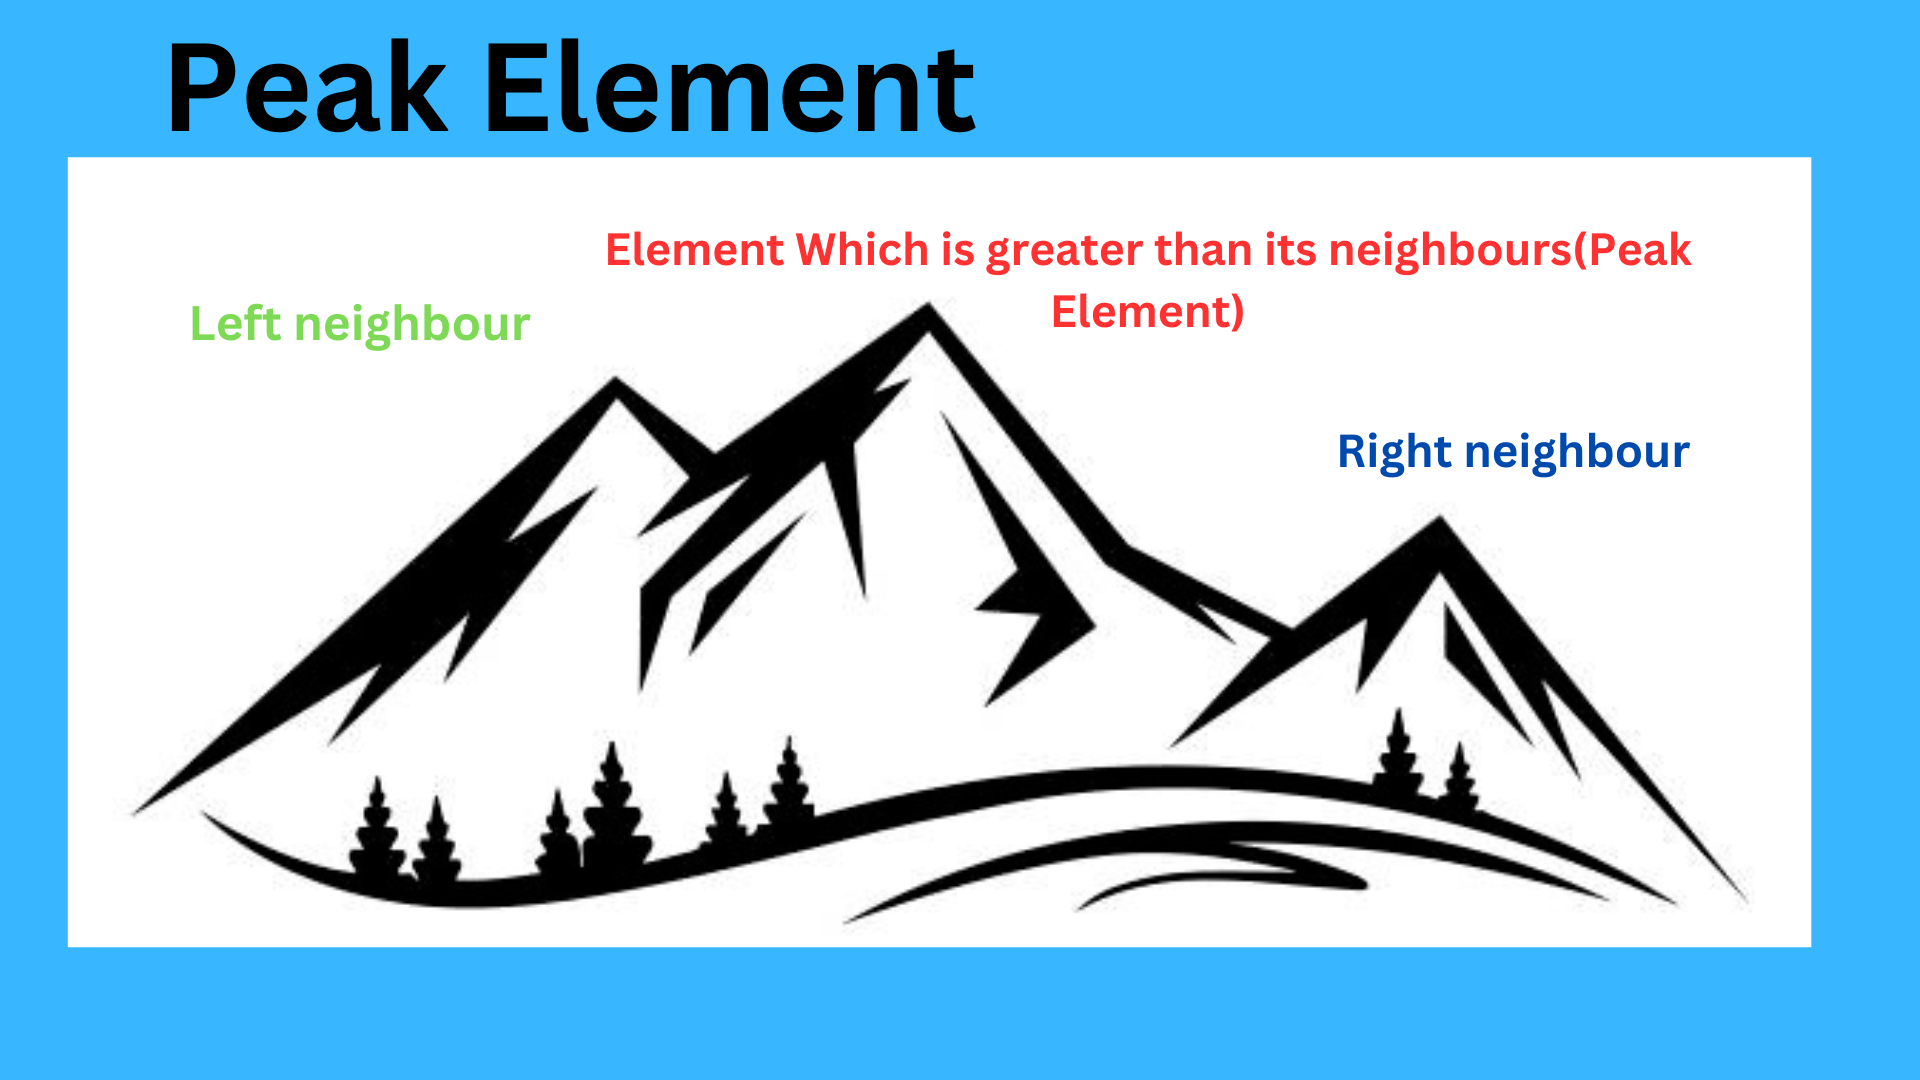 Find a peak element which is larger than its neighbour: